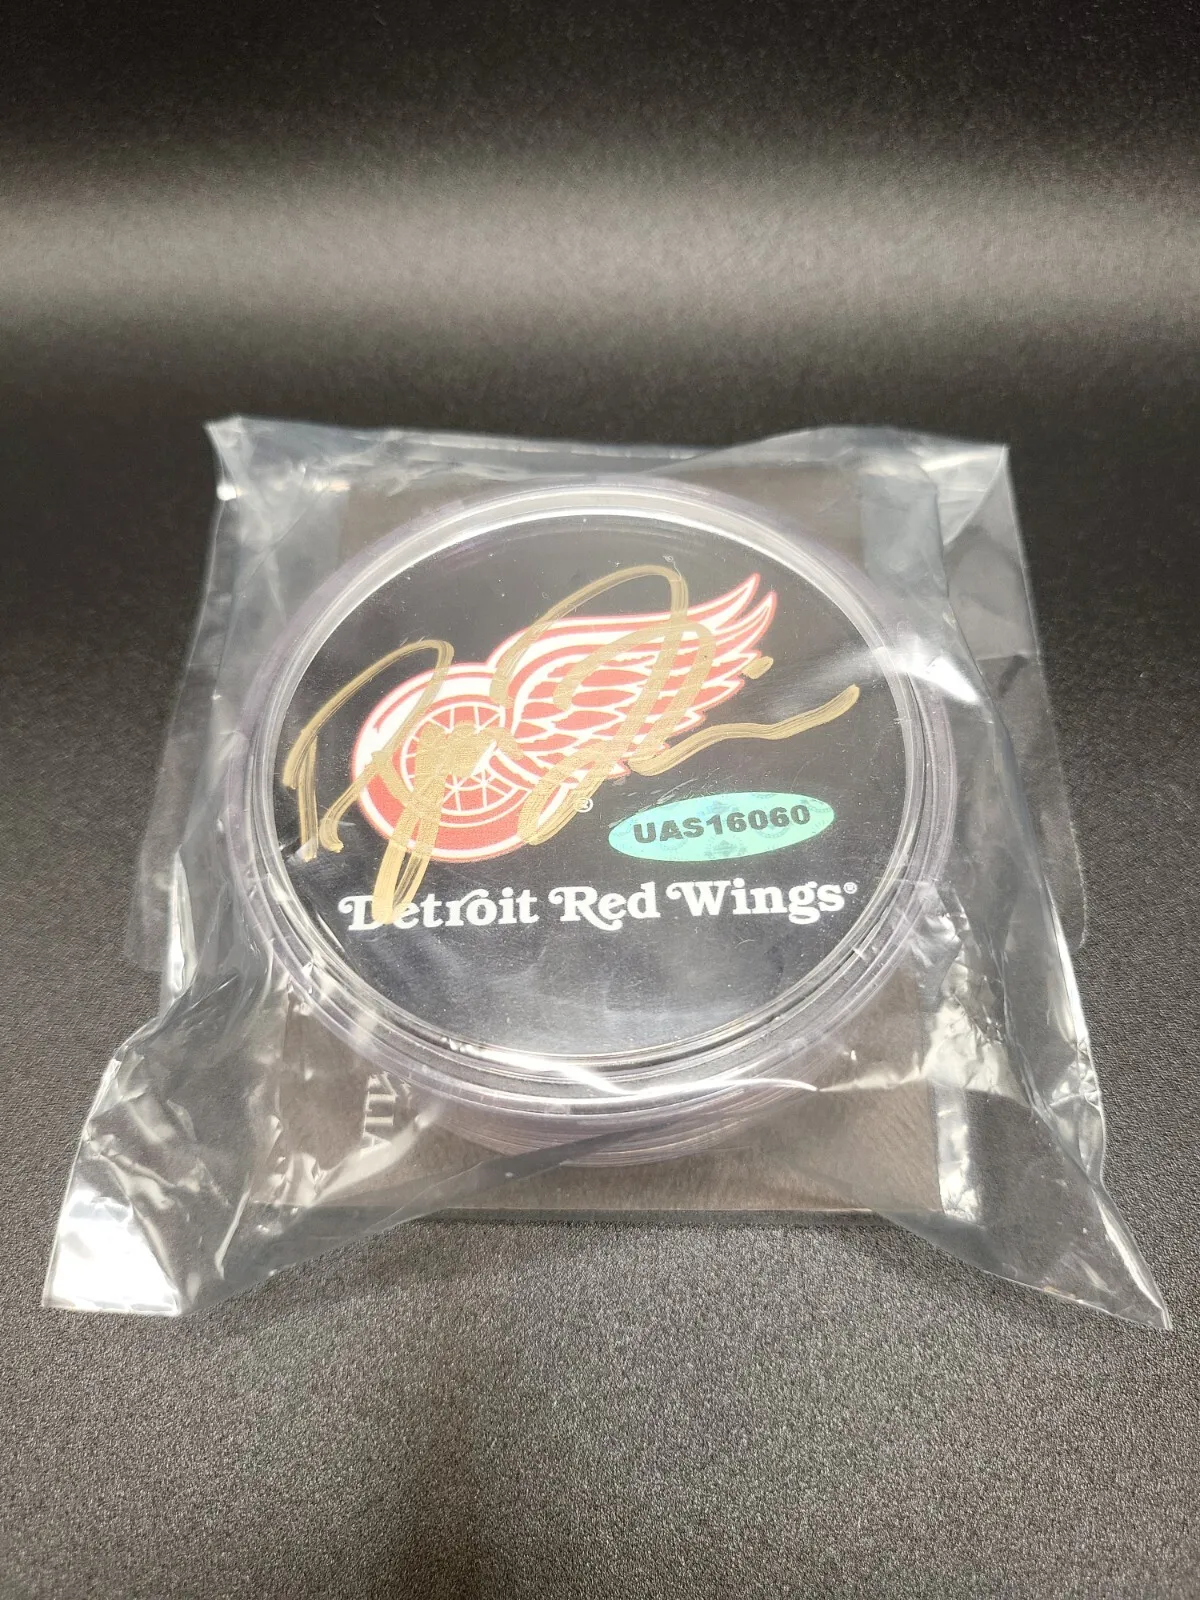 Upper Deck Authenicated - Dylan Larkin - Detroit Red Wings - Signed Hockey Puck